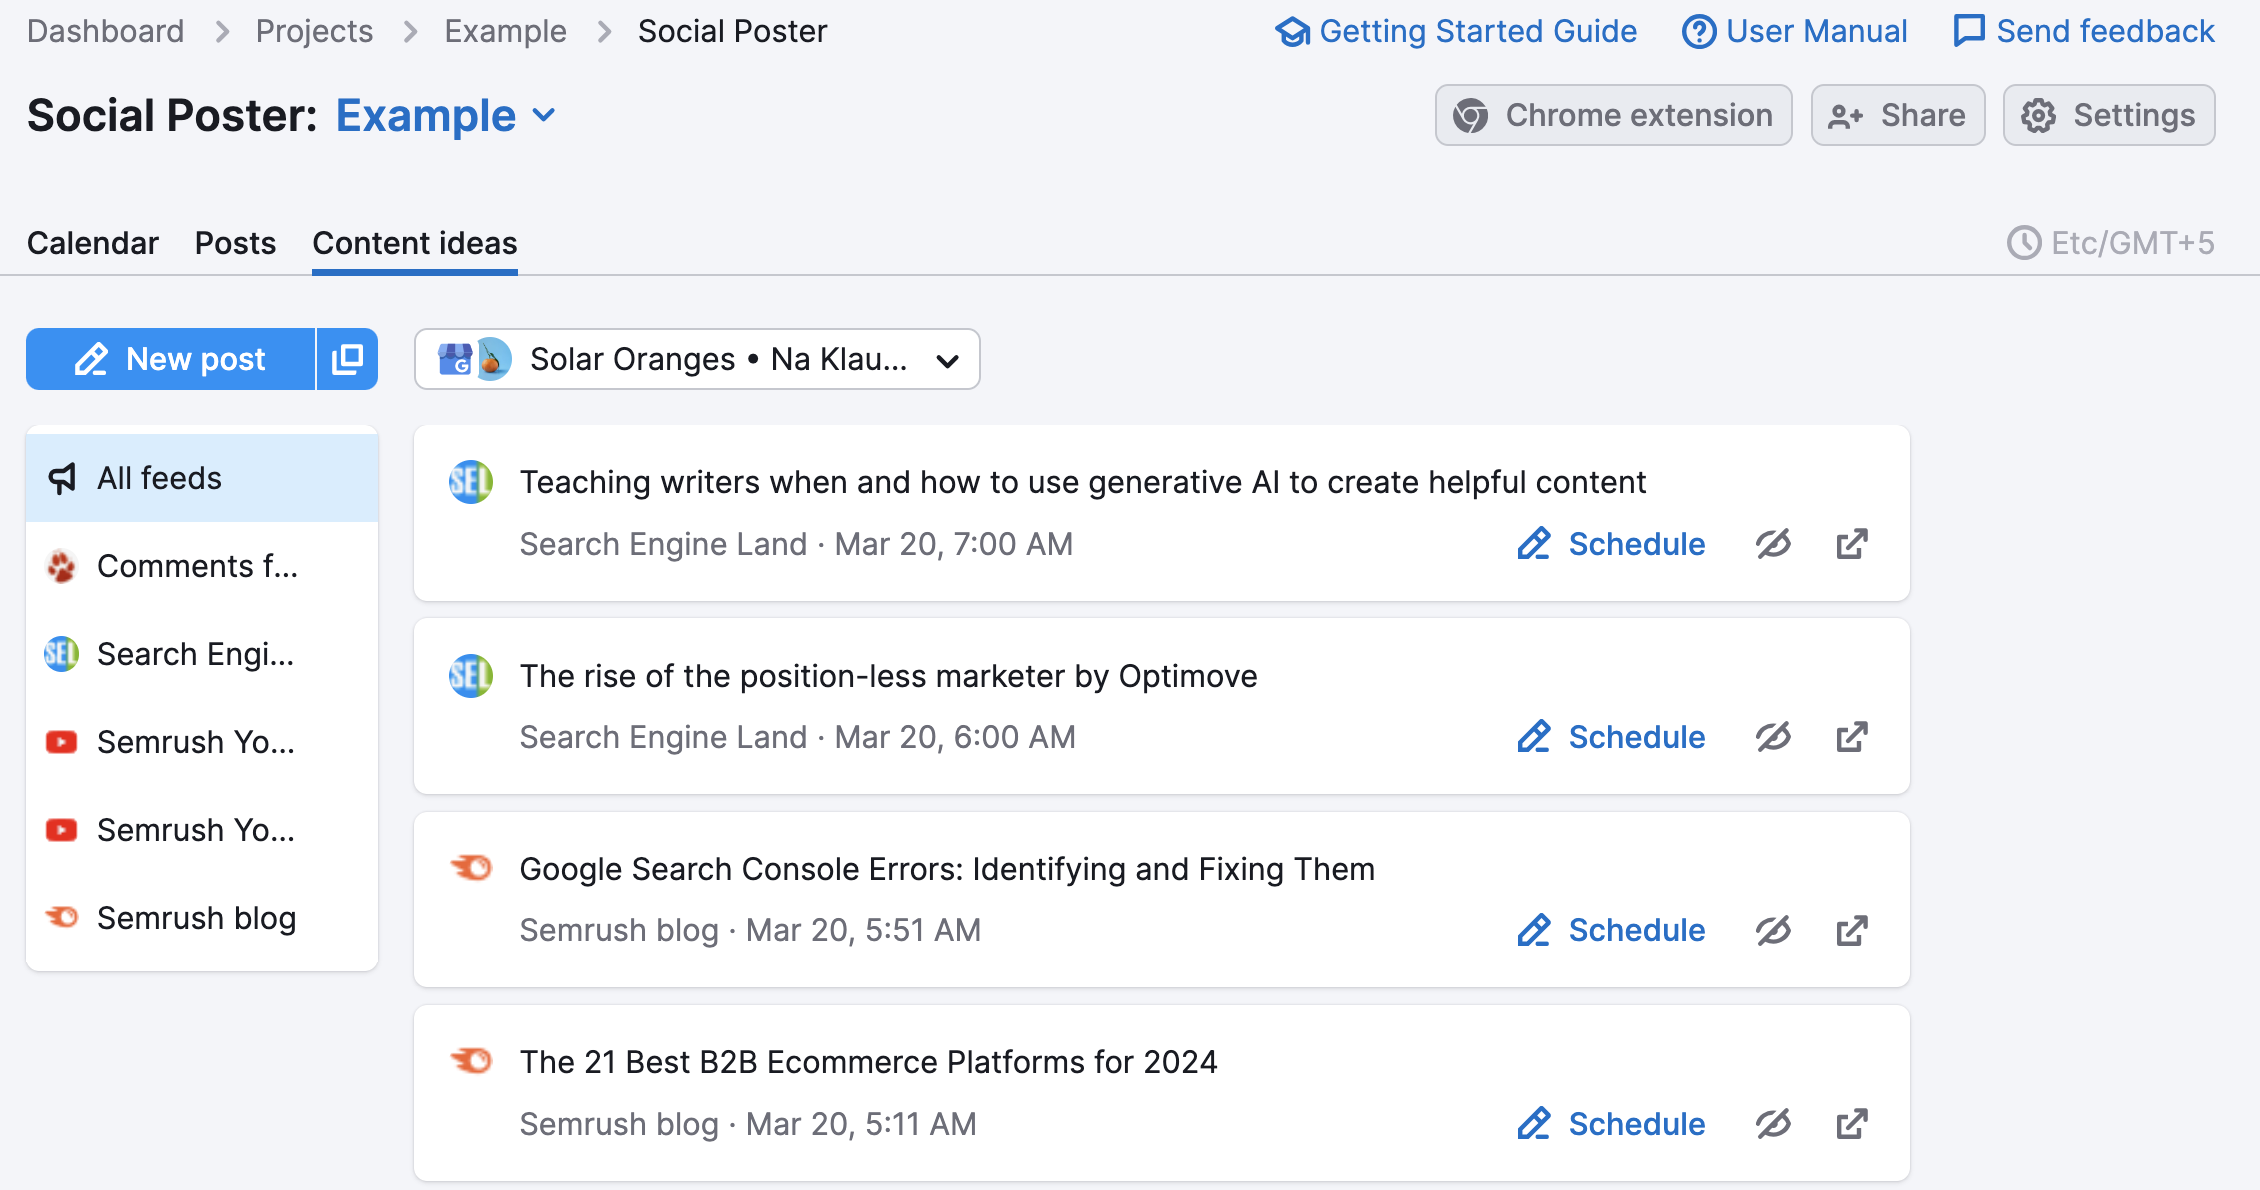 Content Ideas tab in Social Poster